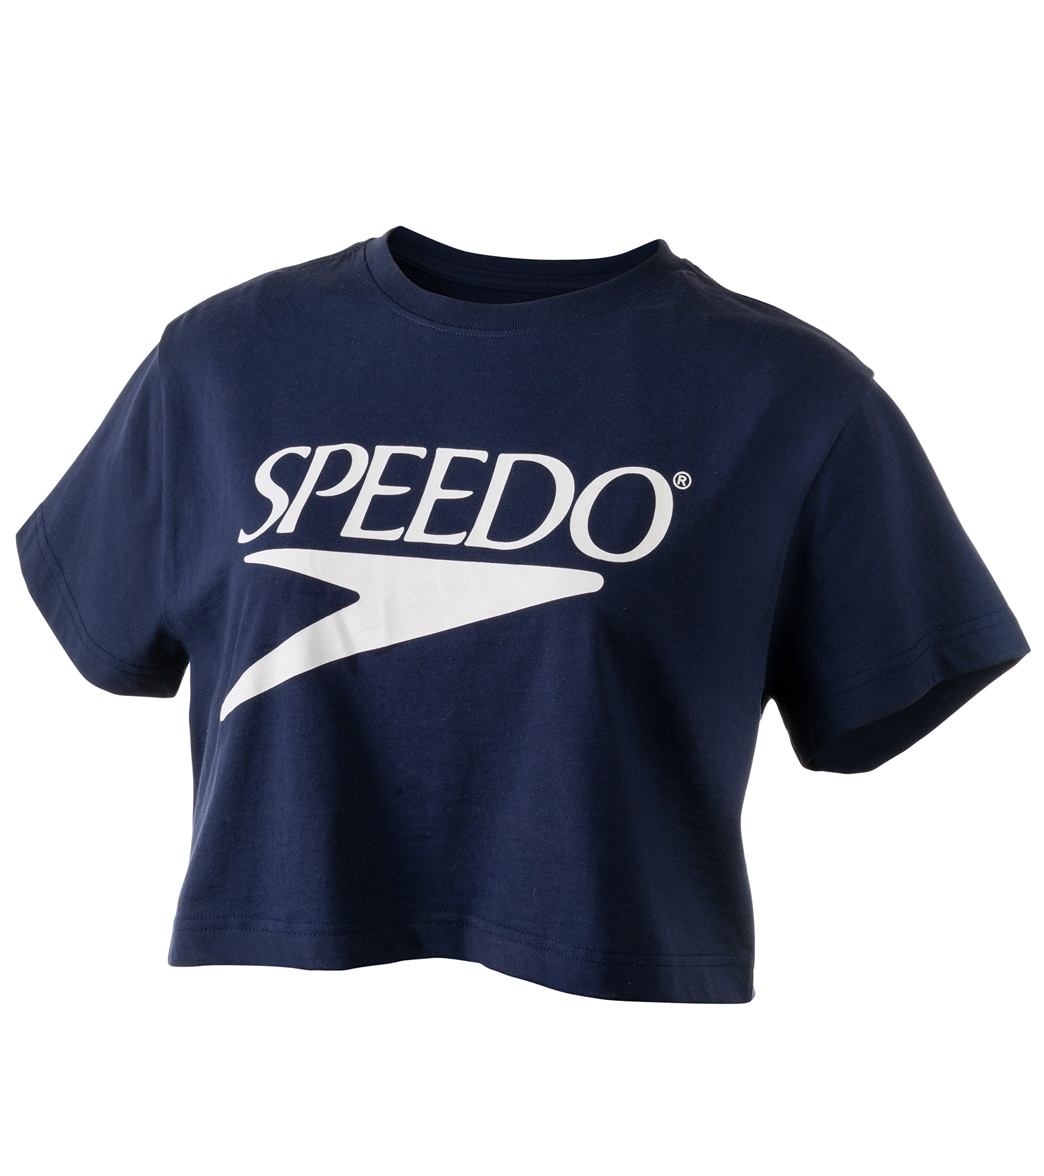 Speedo Women's Vintage Cropped Tee Shirt - Navy Small Size Small - Swimoutlet.com